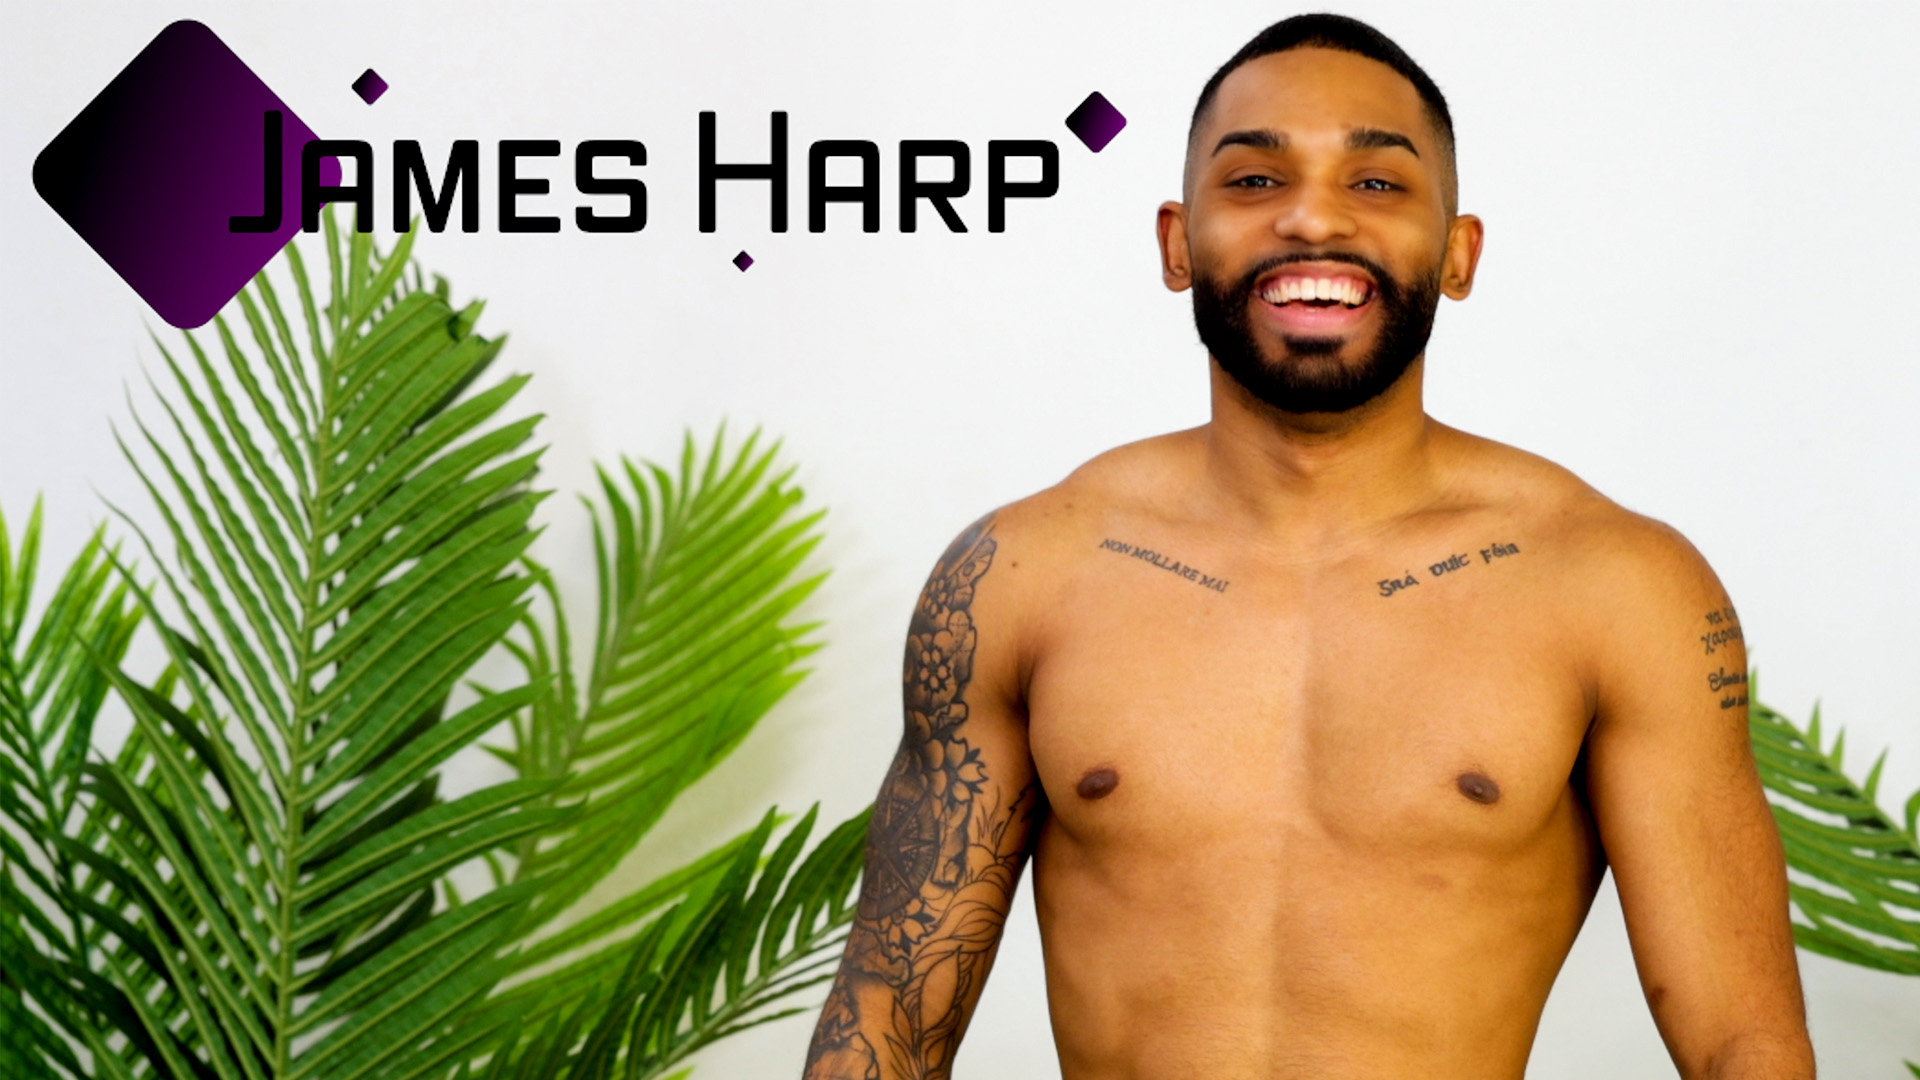 Interview: All Eyes Are On New Hung Stud James Harp!